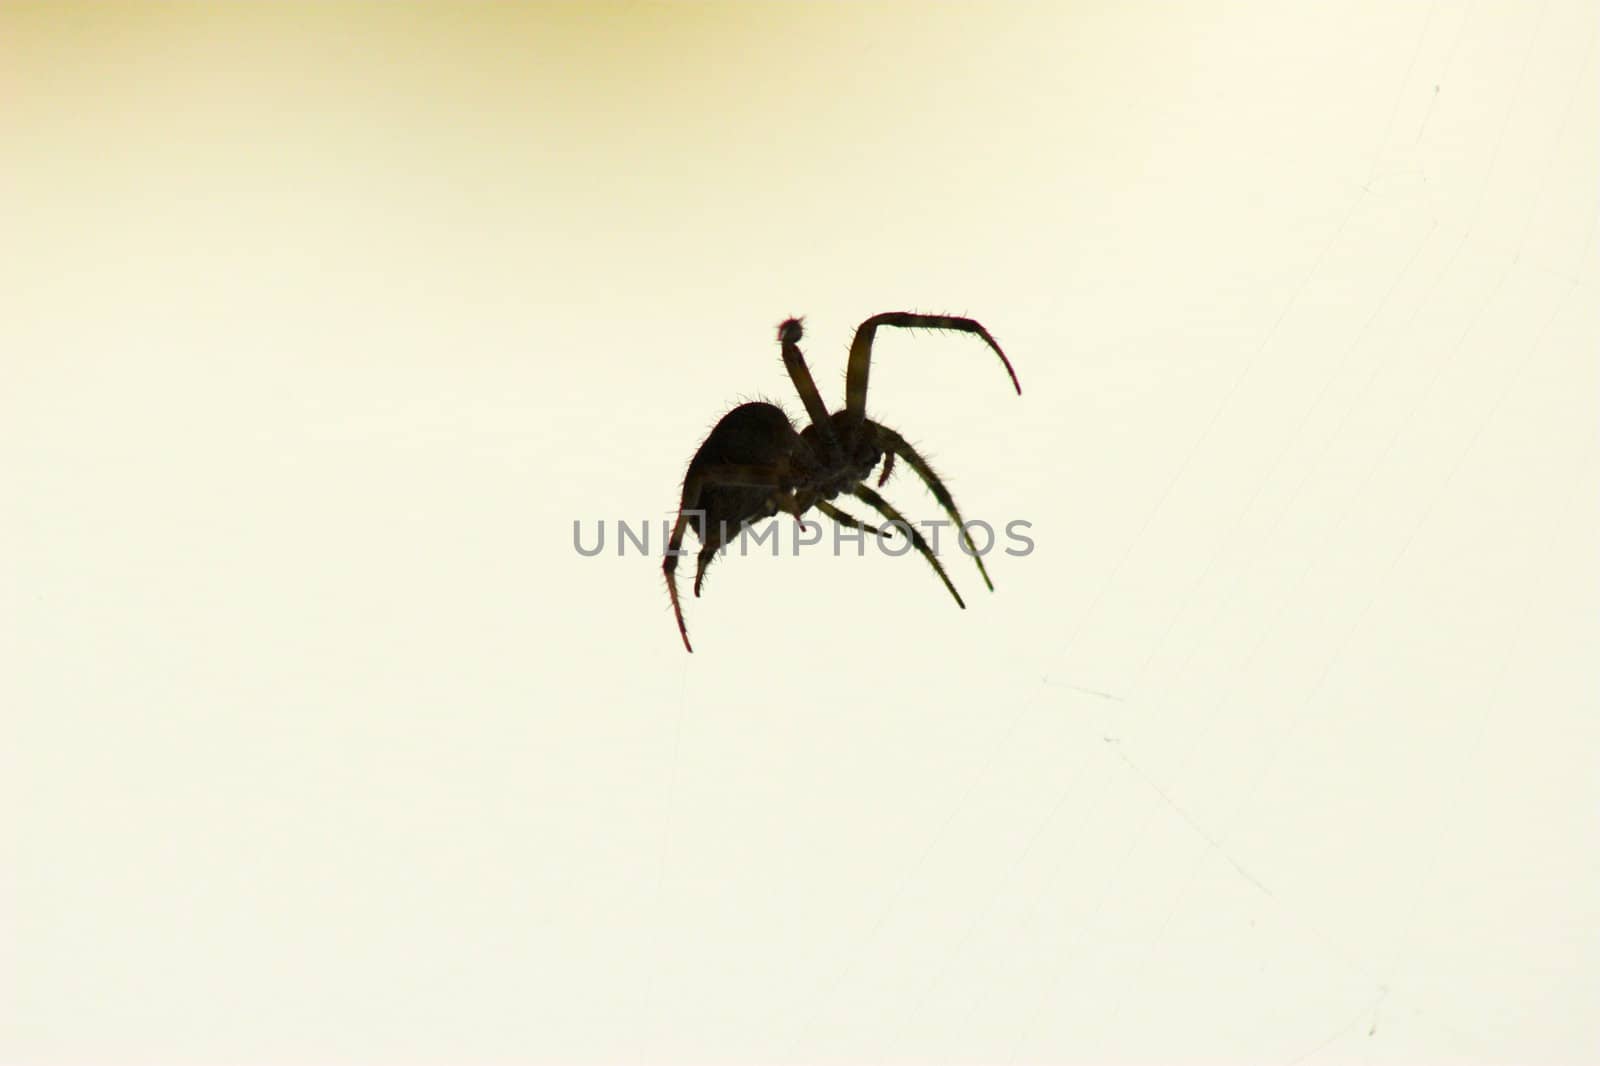 Small spider sitting on the web during sunset